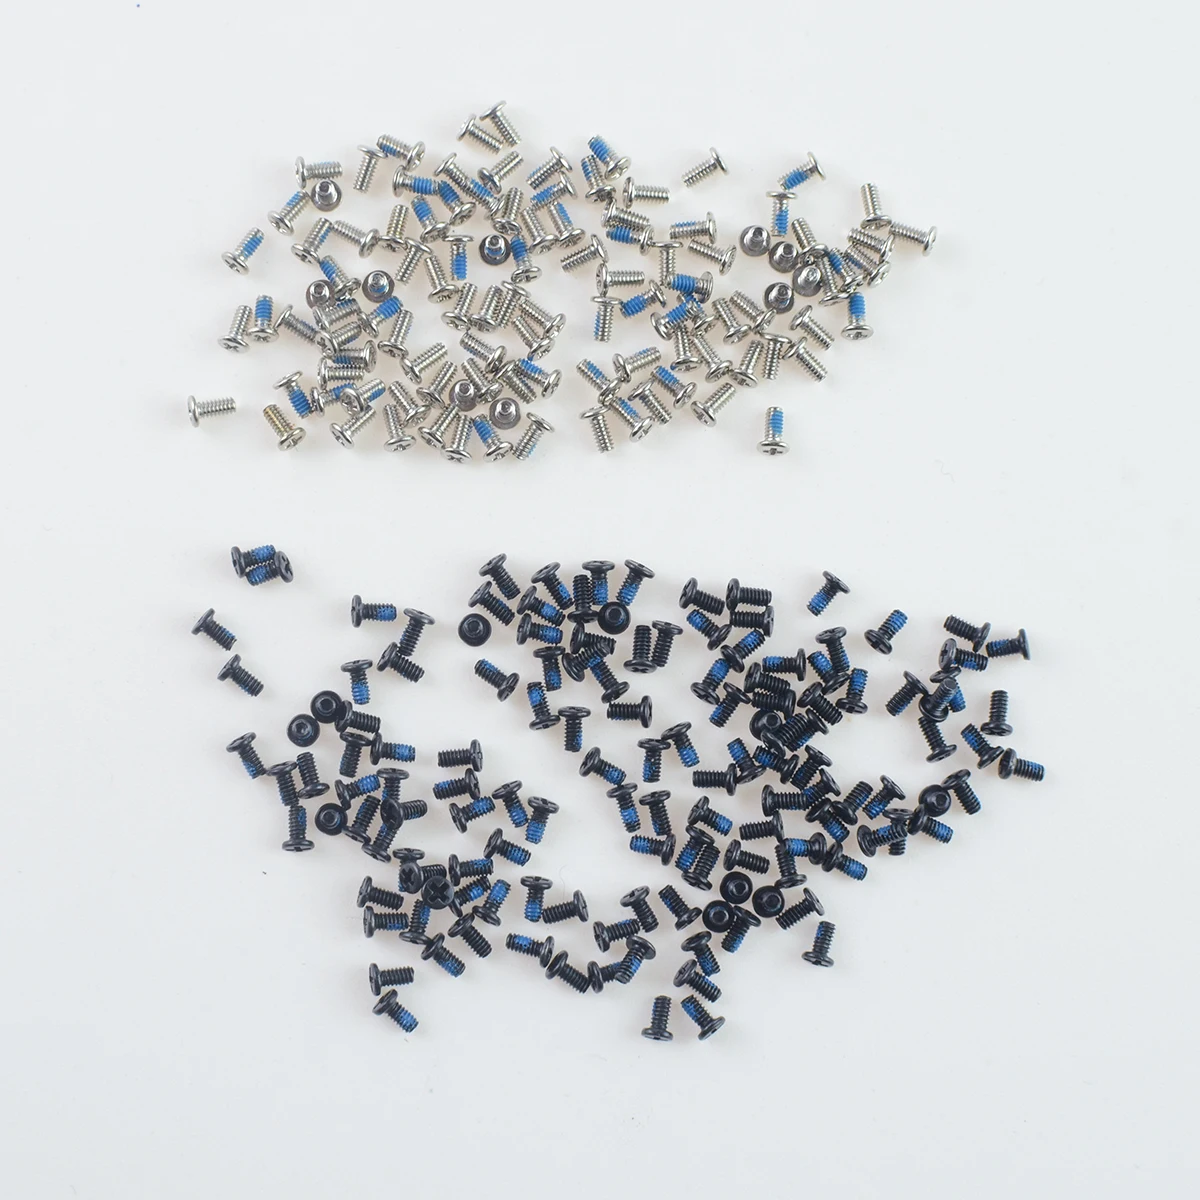 500PCS 1.4*3.0mm Screws Replacement For Samsung Galaxy A50 A40 A51 A80 A90 A11 A71 A30 A20 3.5mm Inside Motherboard Frame Screw